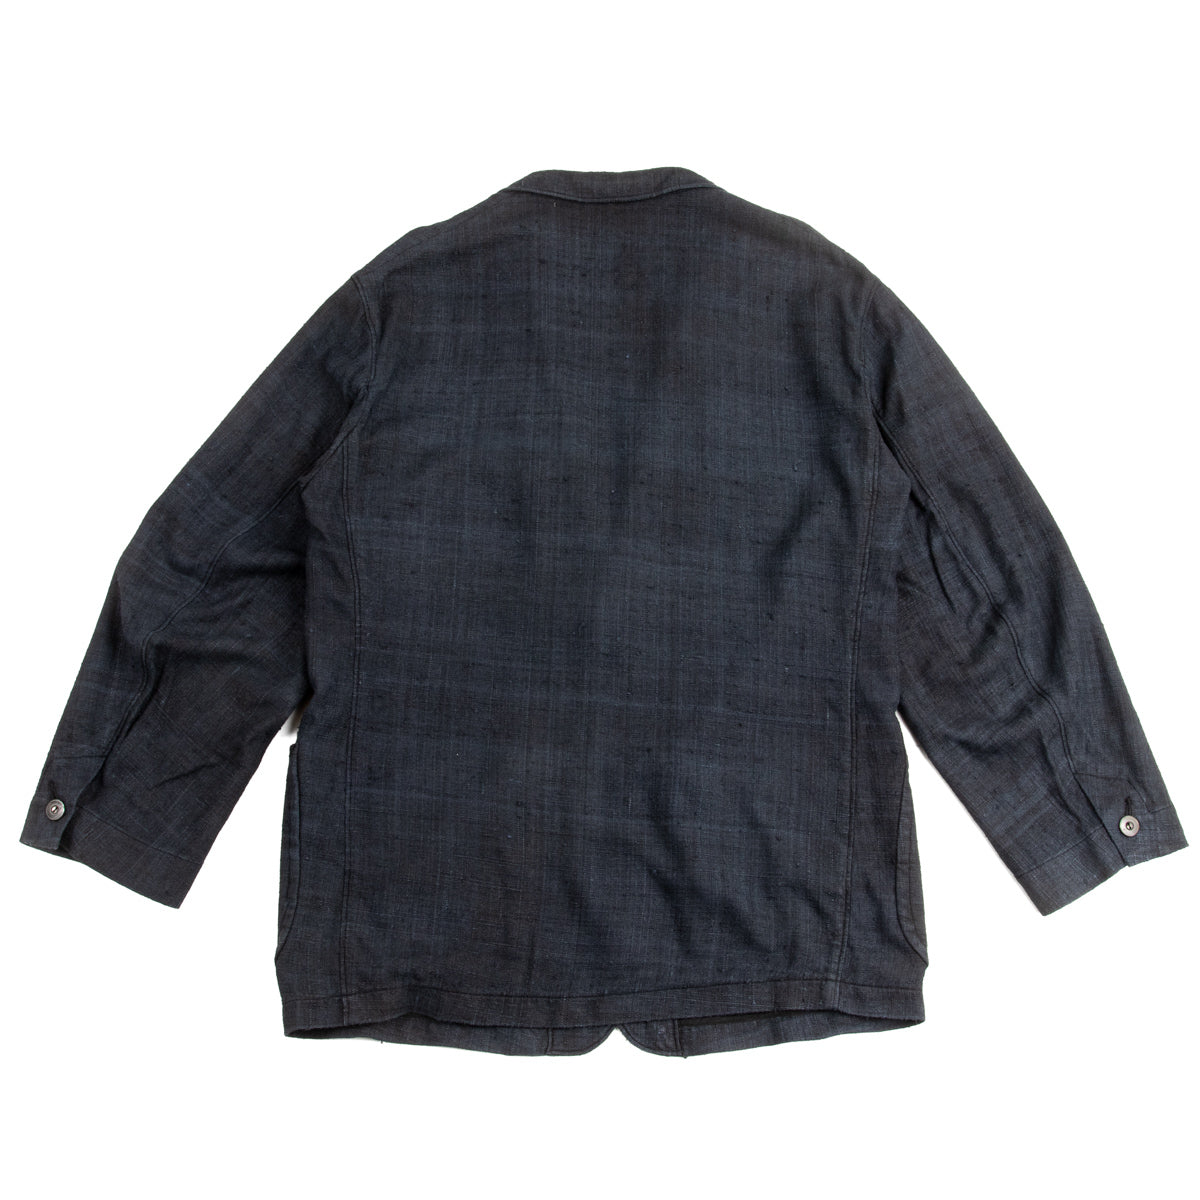 Relaxed Zoot Jacket - Midnight Tussah Silk Broadcloth